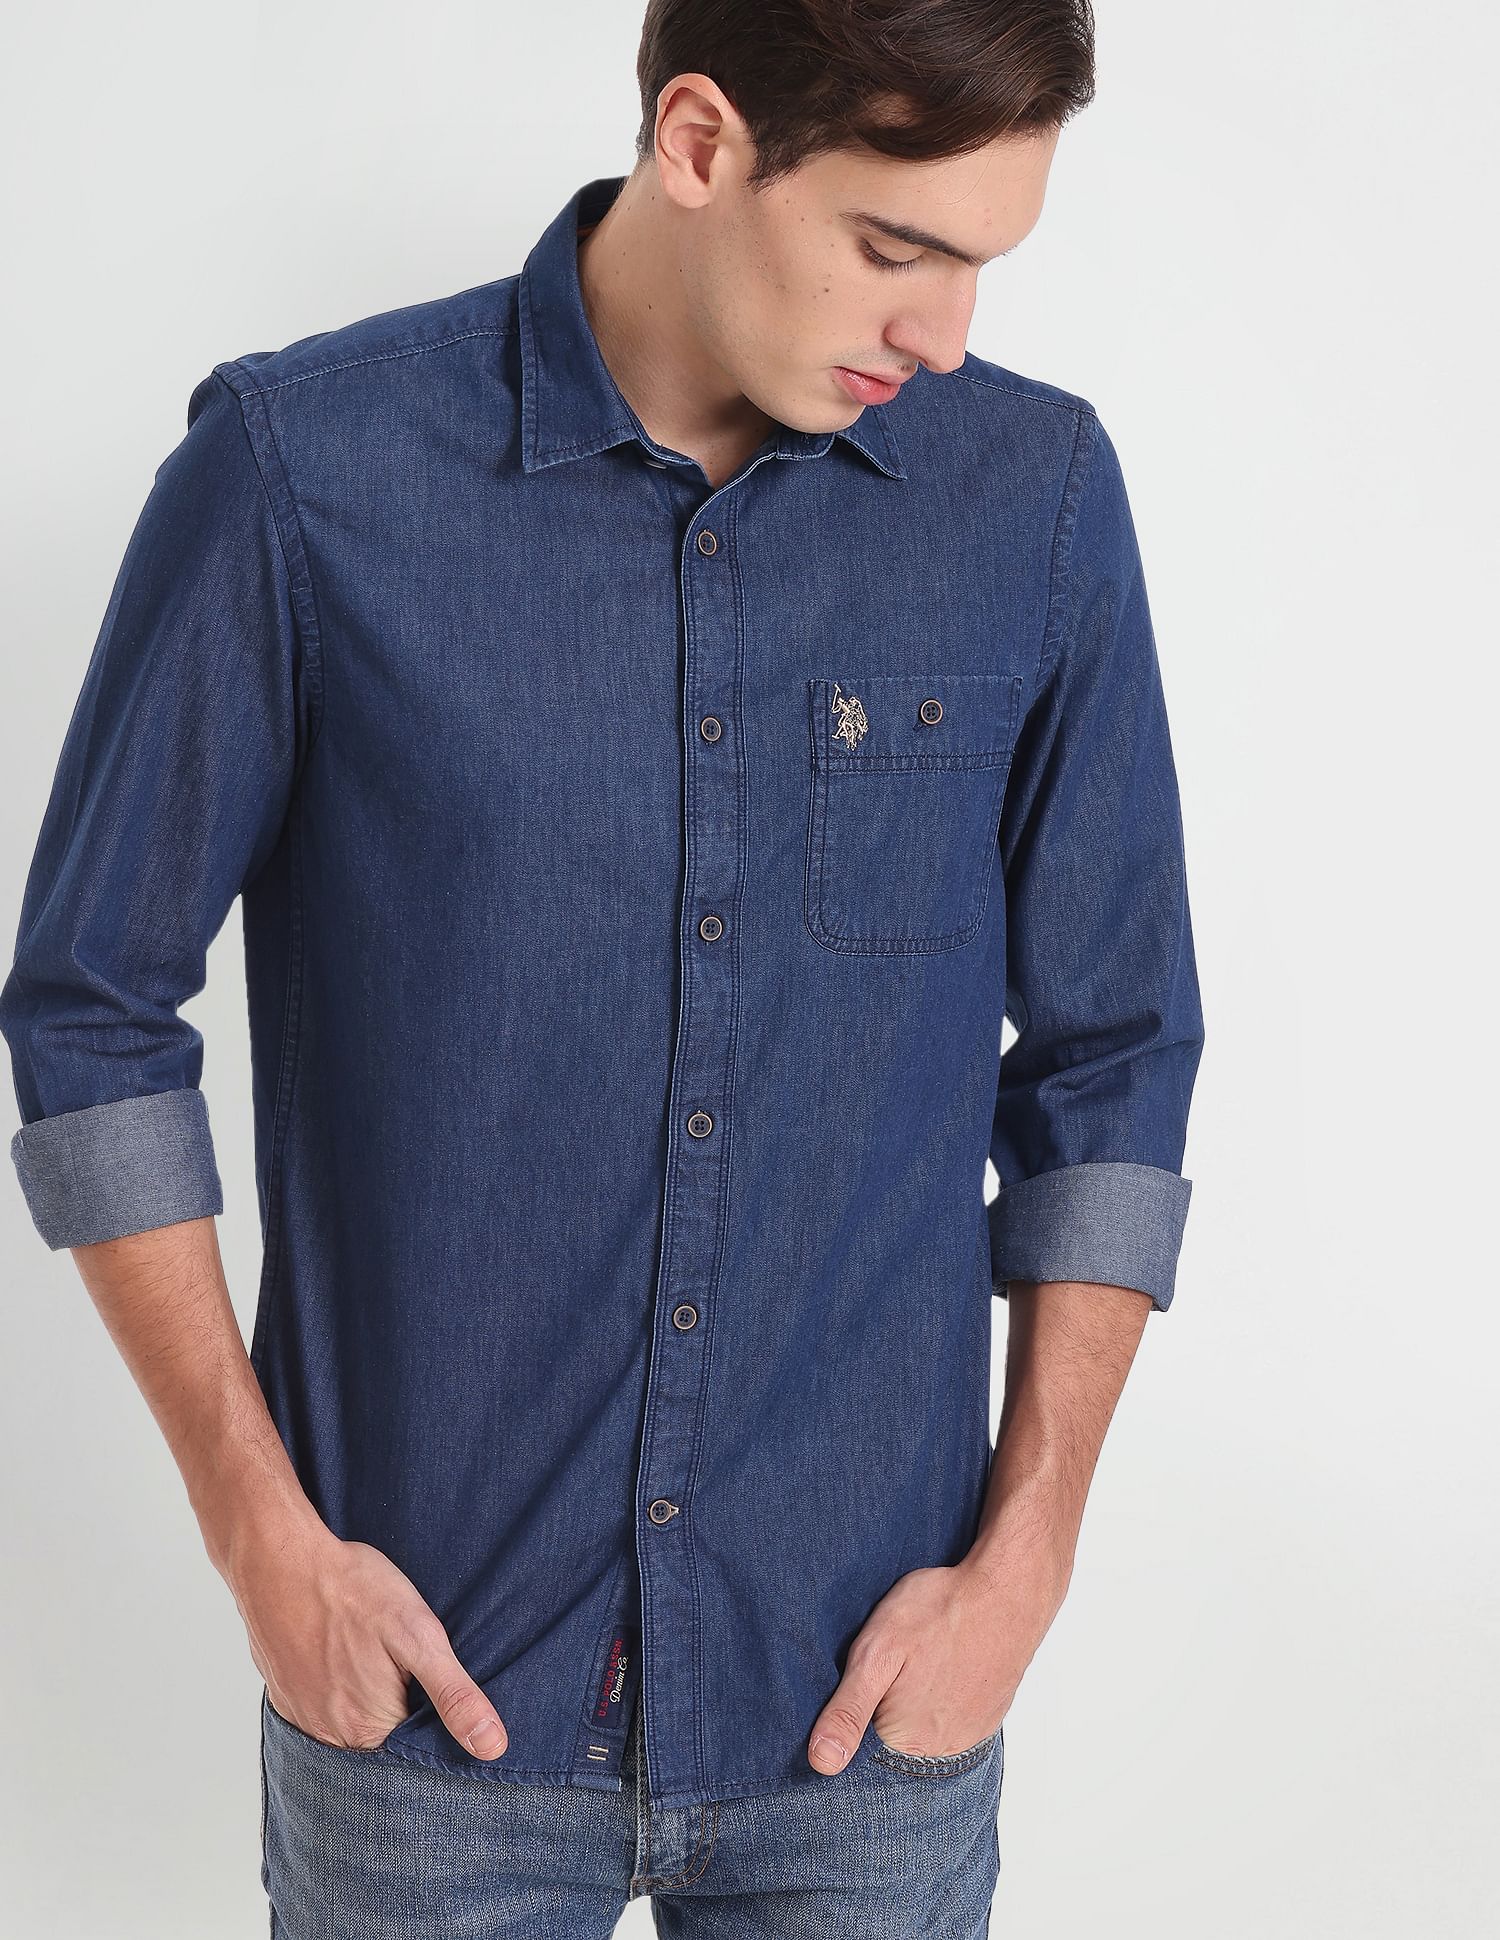 Buy Jeans Shirts Online In India At Best Price Offers | Tata CLiQ